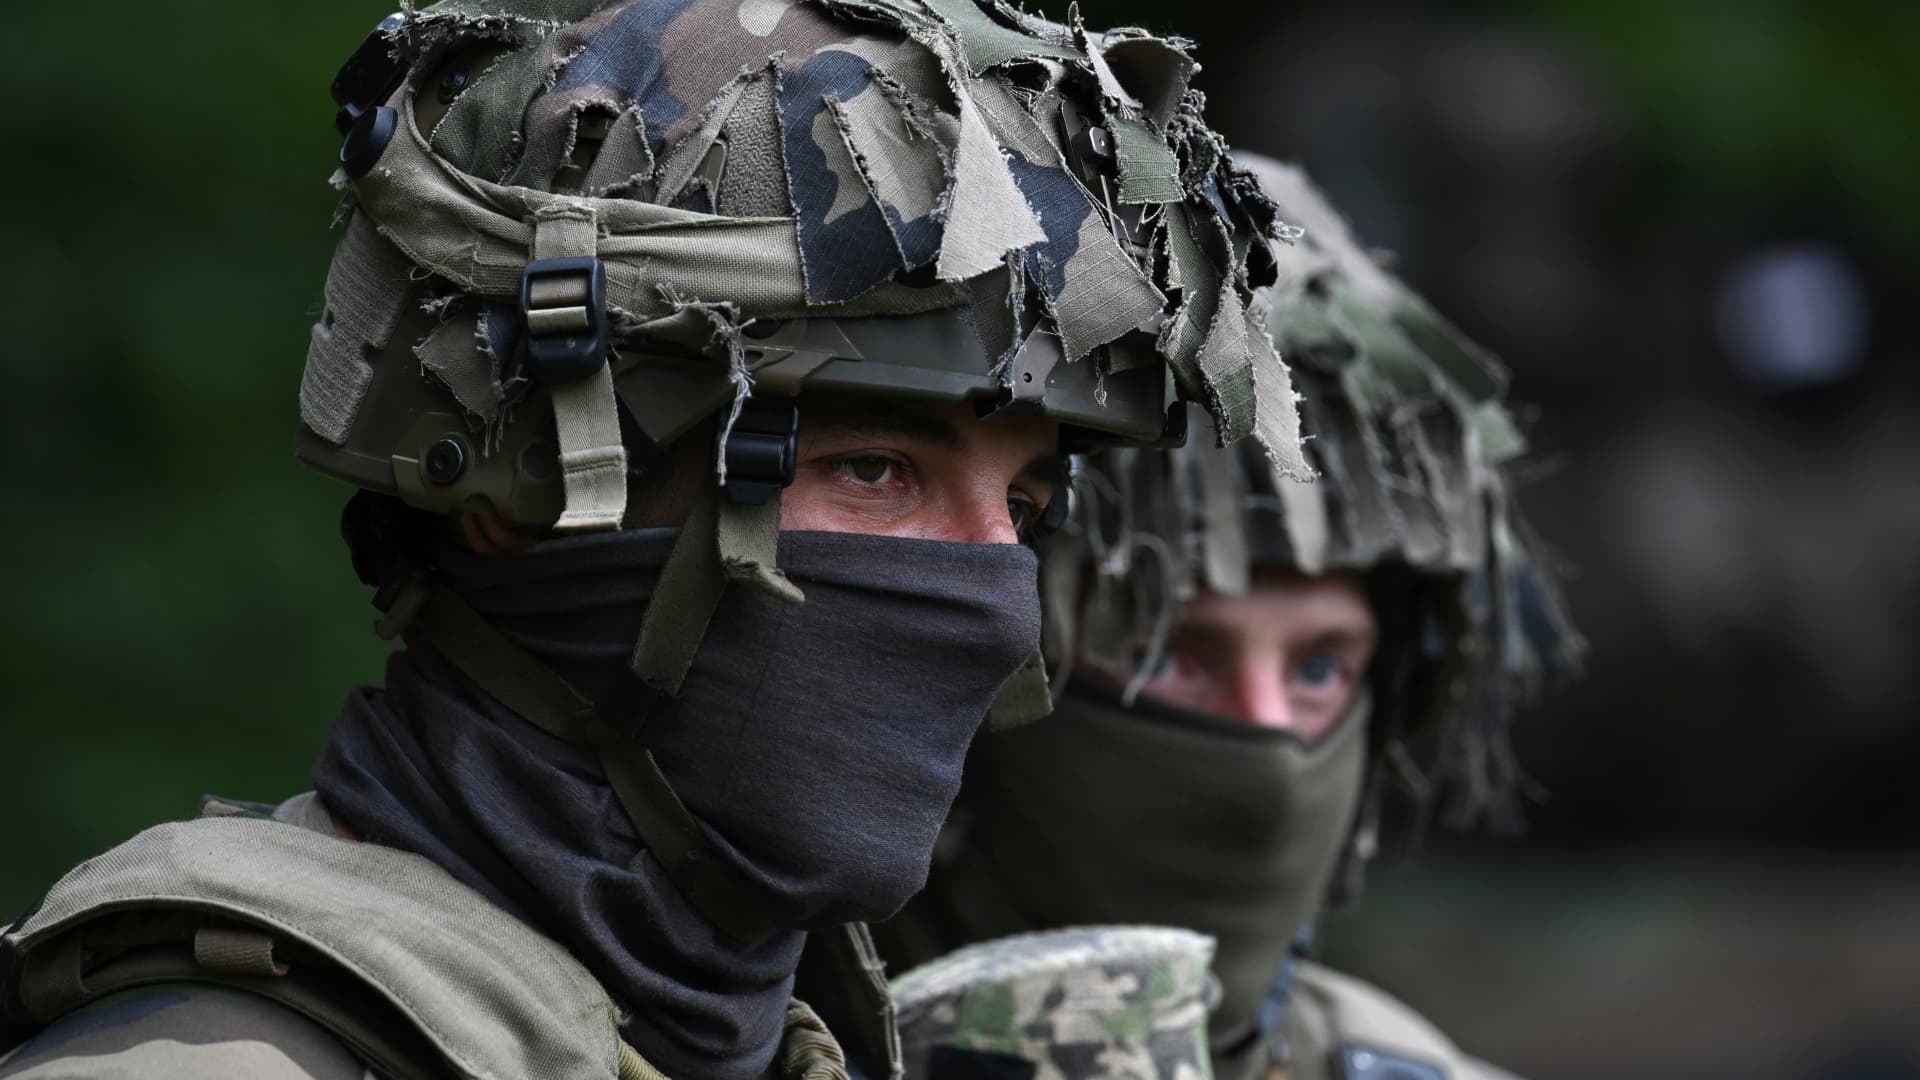 Ukraine war live updates: European ground troops could be sent to Ukraine in future, France says